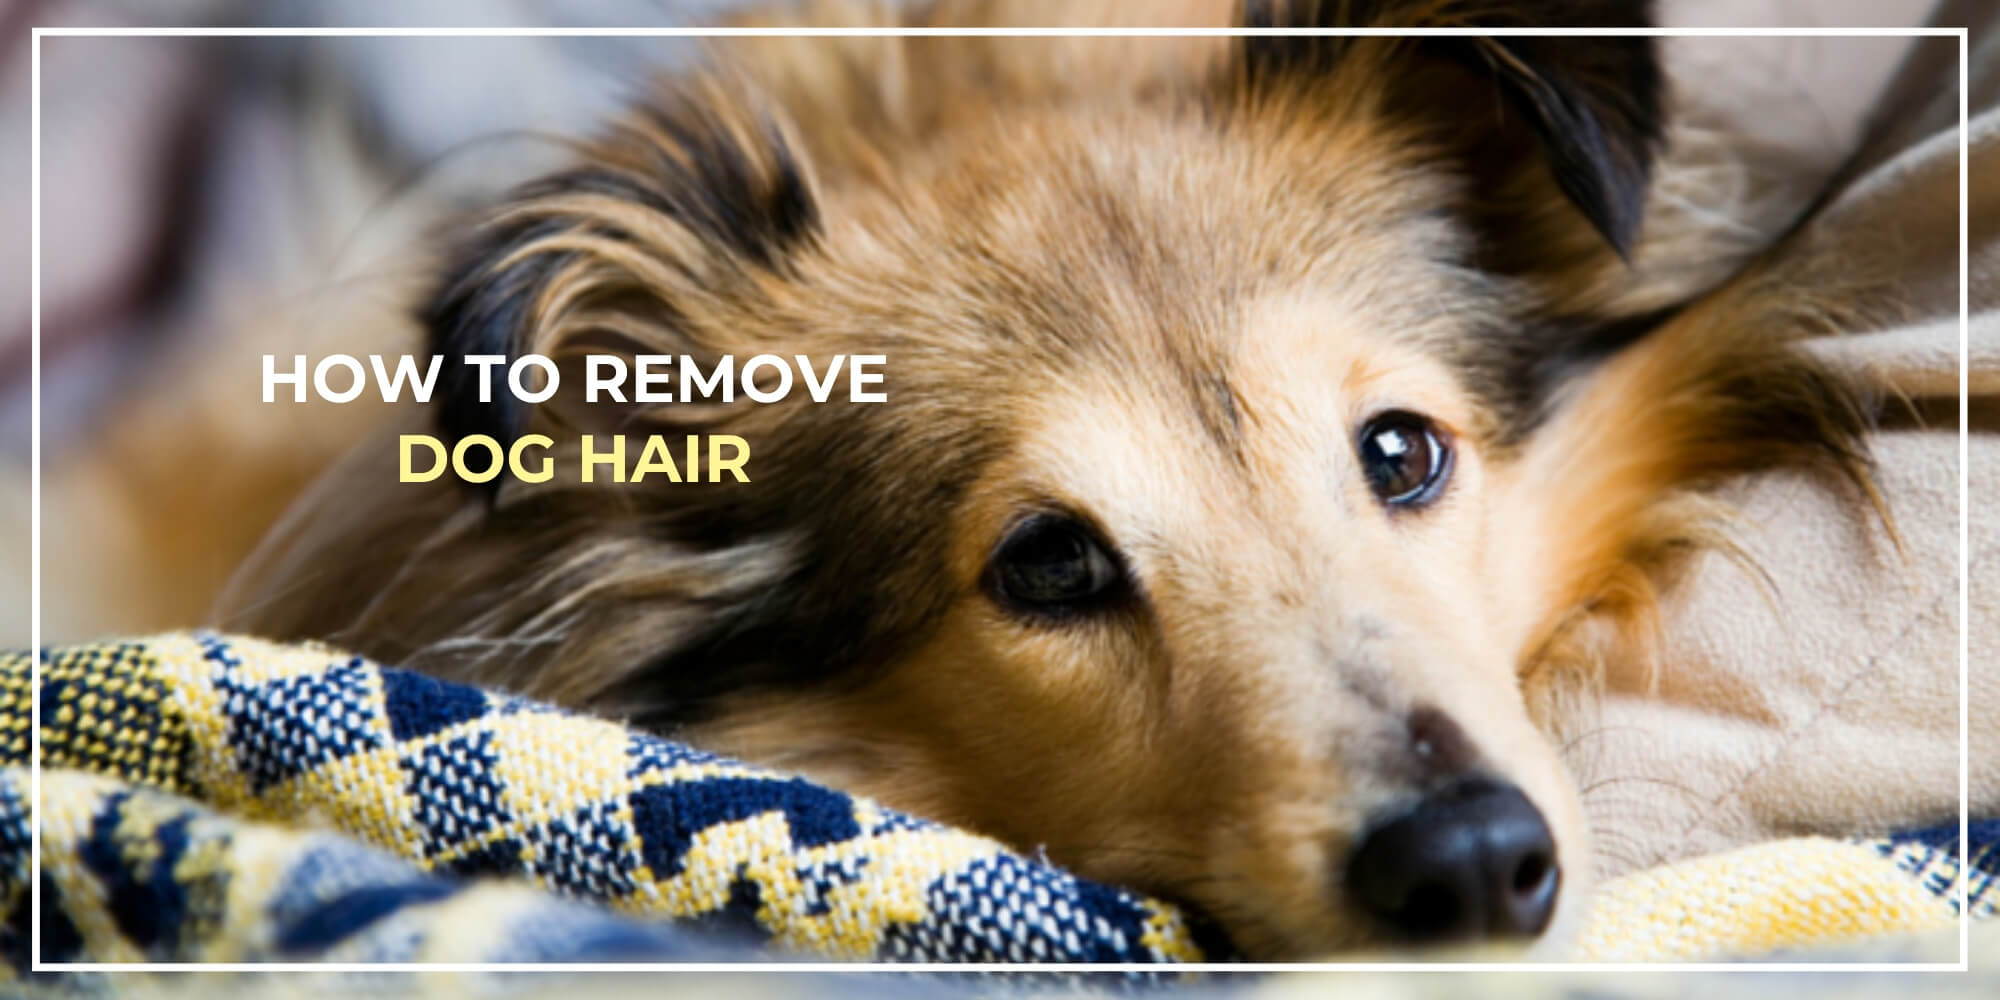 The Easiest Ways To Remove Dog Hair From Your Clothes Quick - My